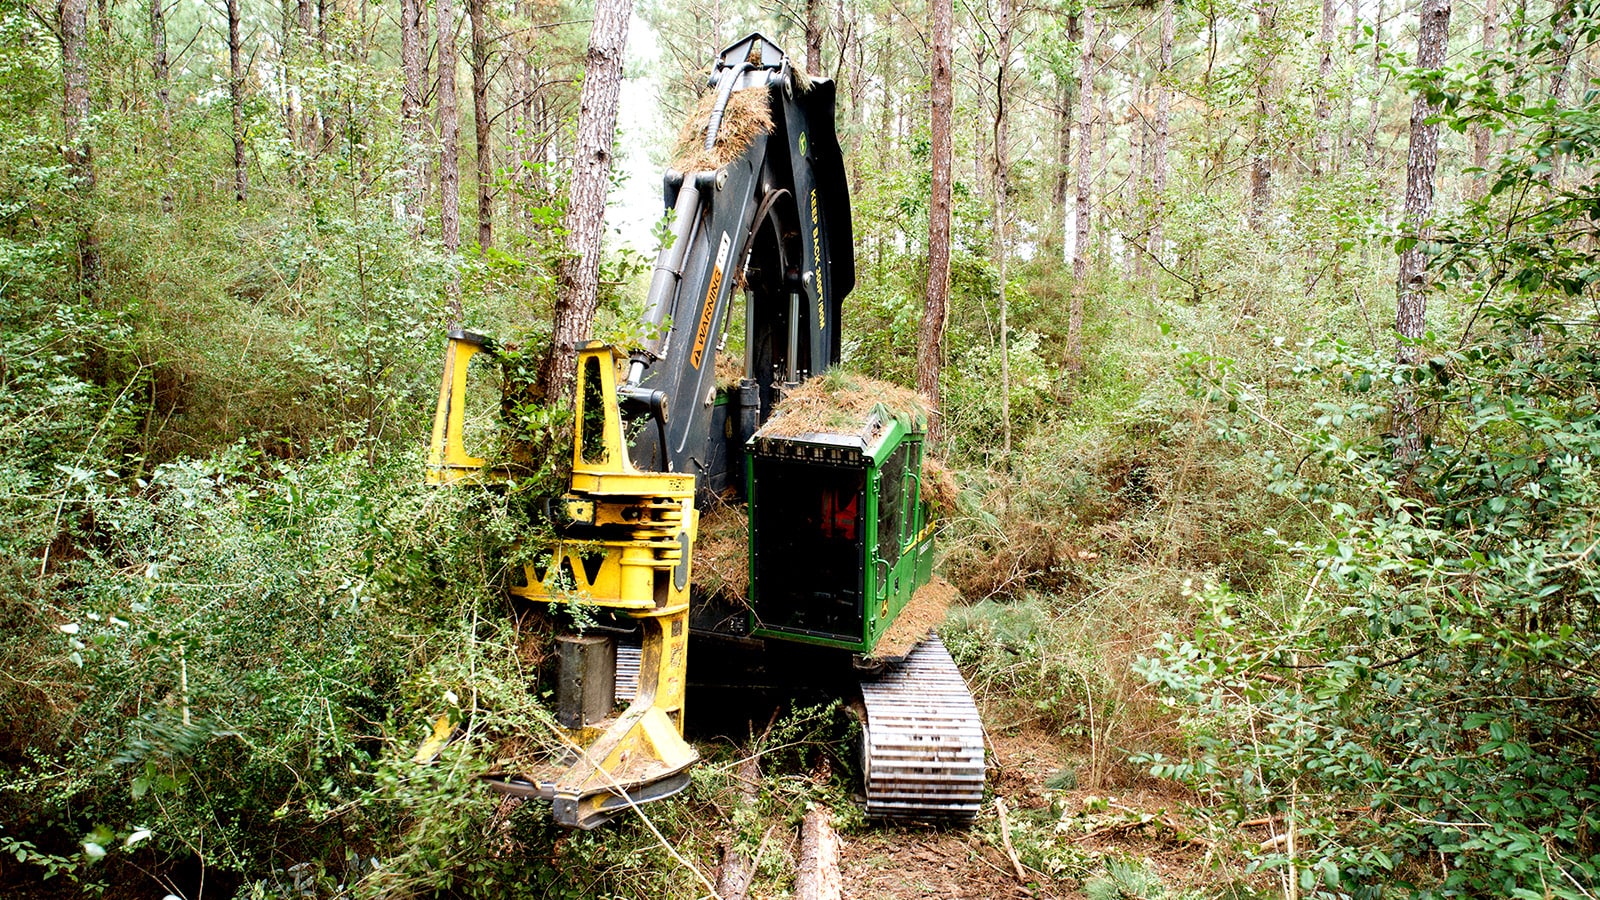 A feller buncher with pine needles on top of the cab works in the woods, cutting down a tree.